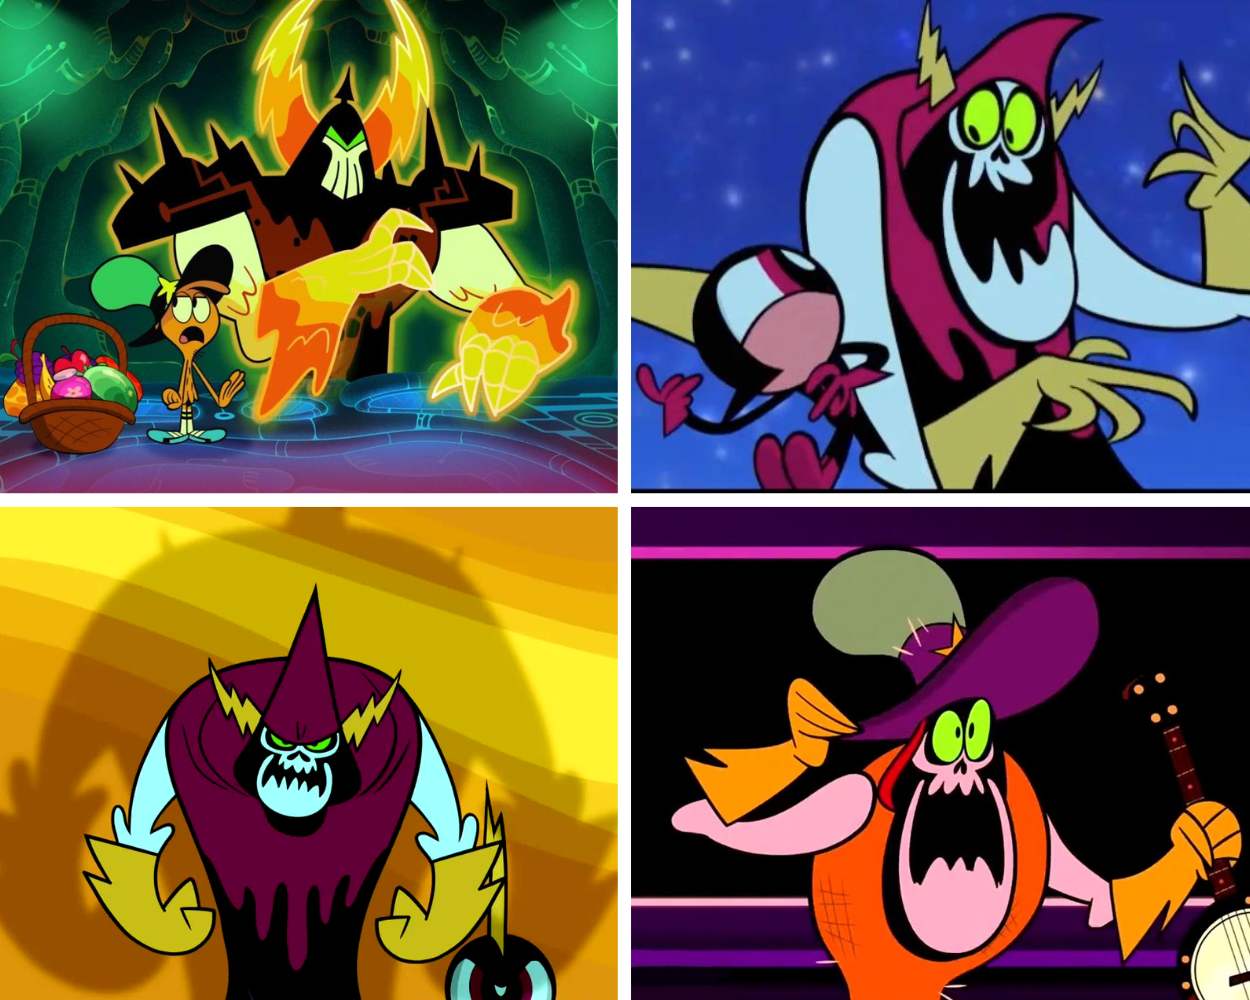 Lord Hater's Personality